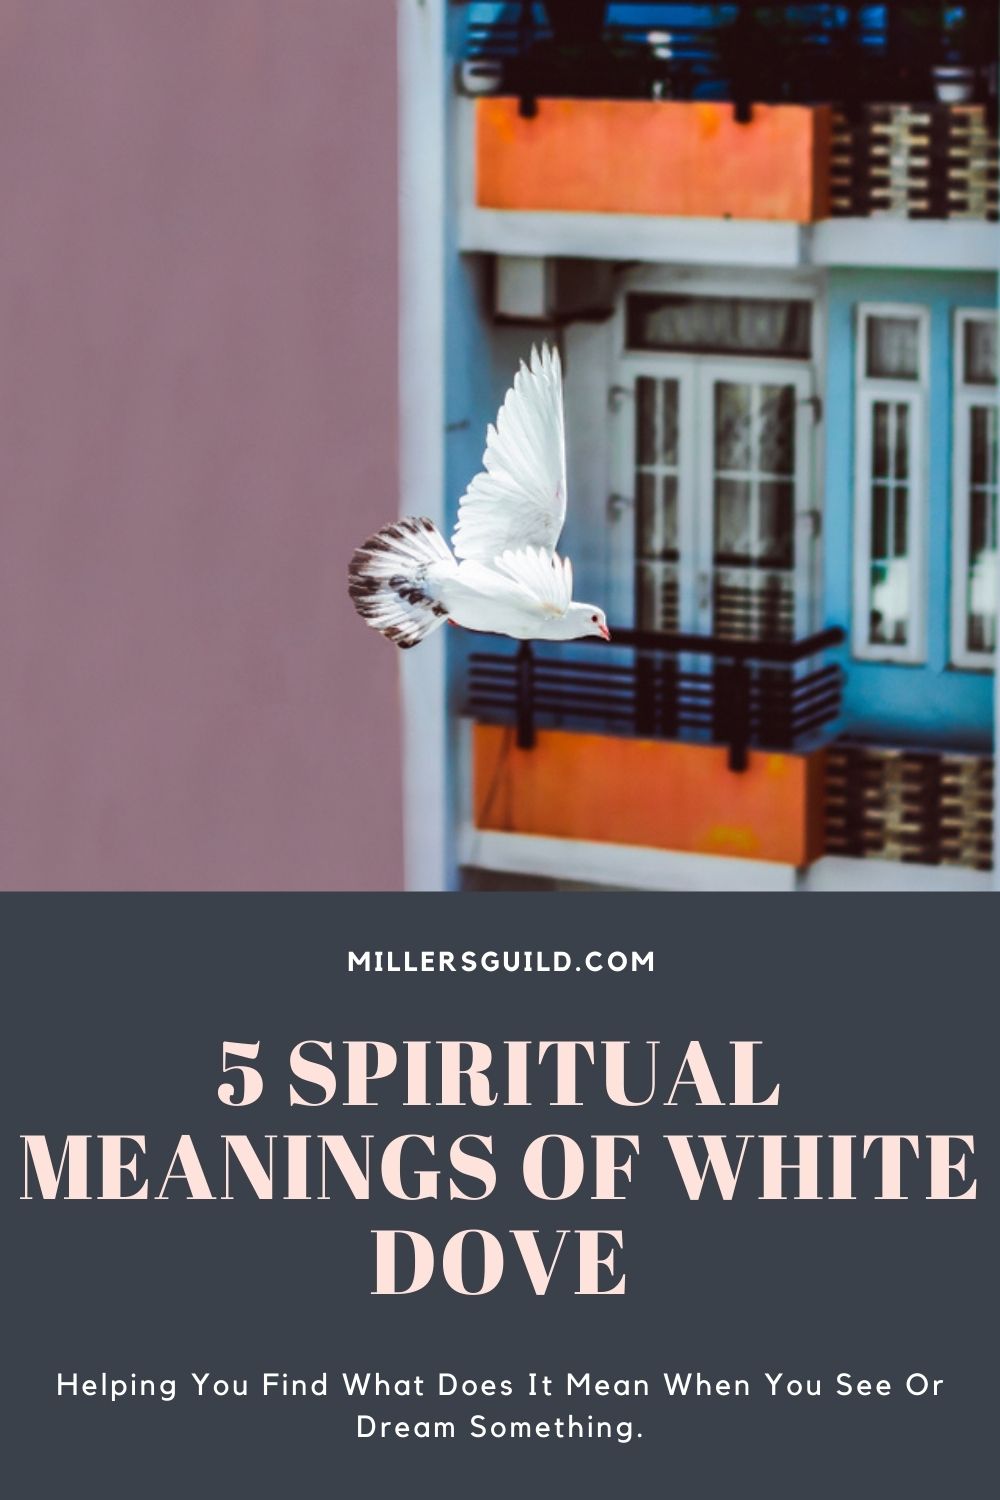 Spiritual Meanings of White Dove